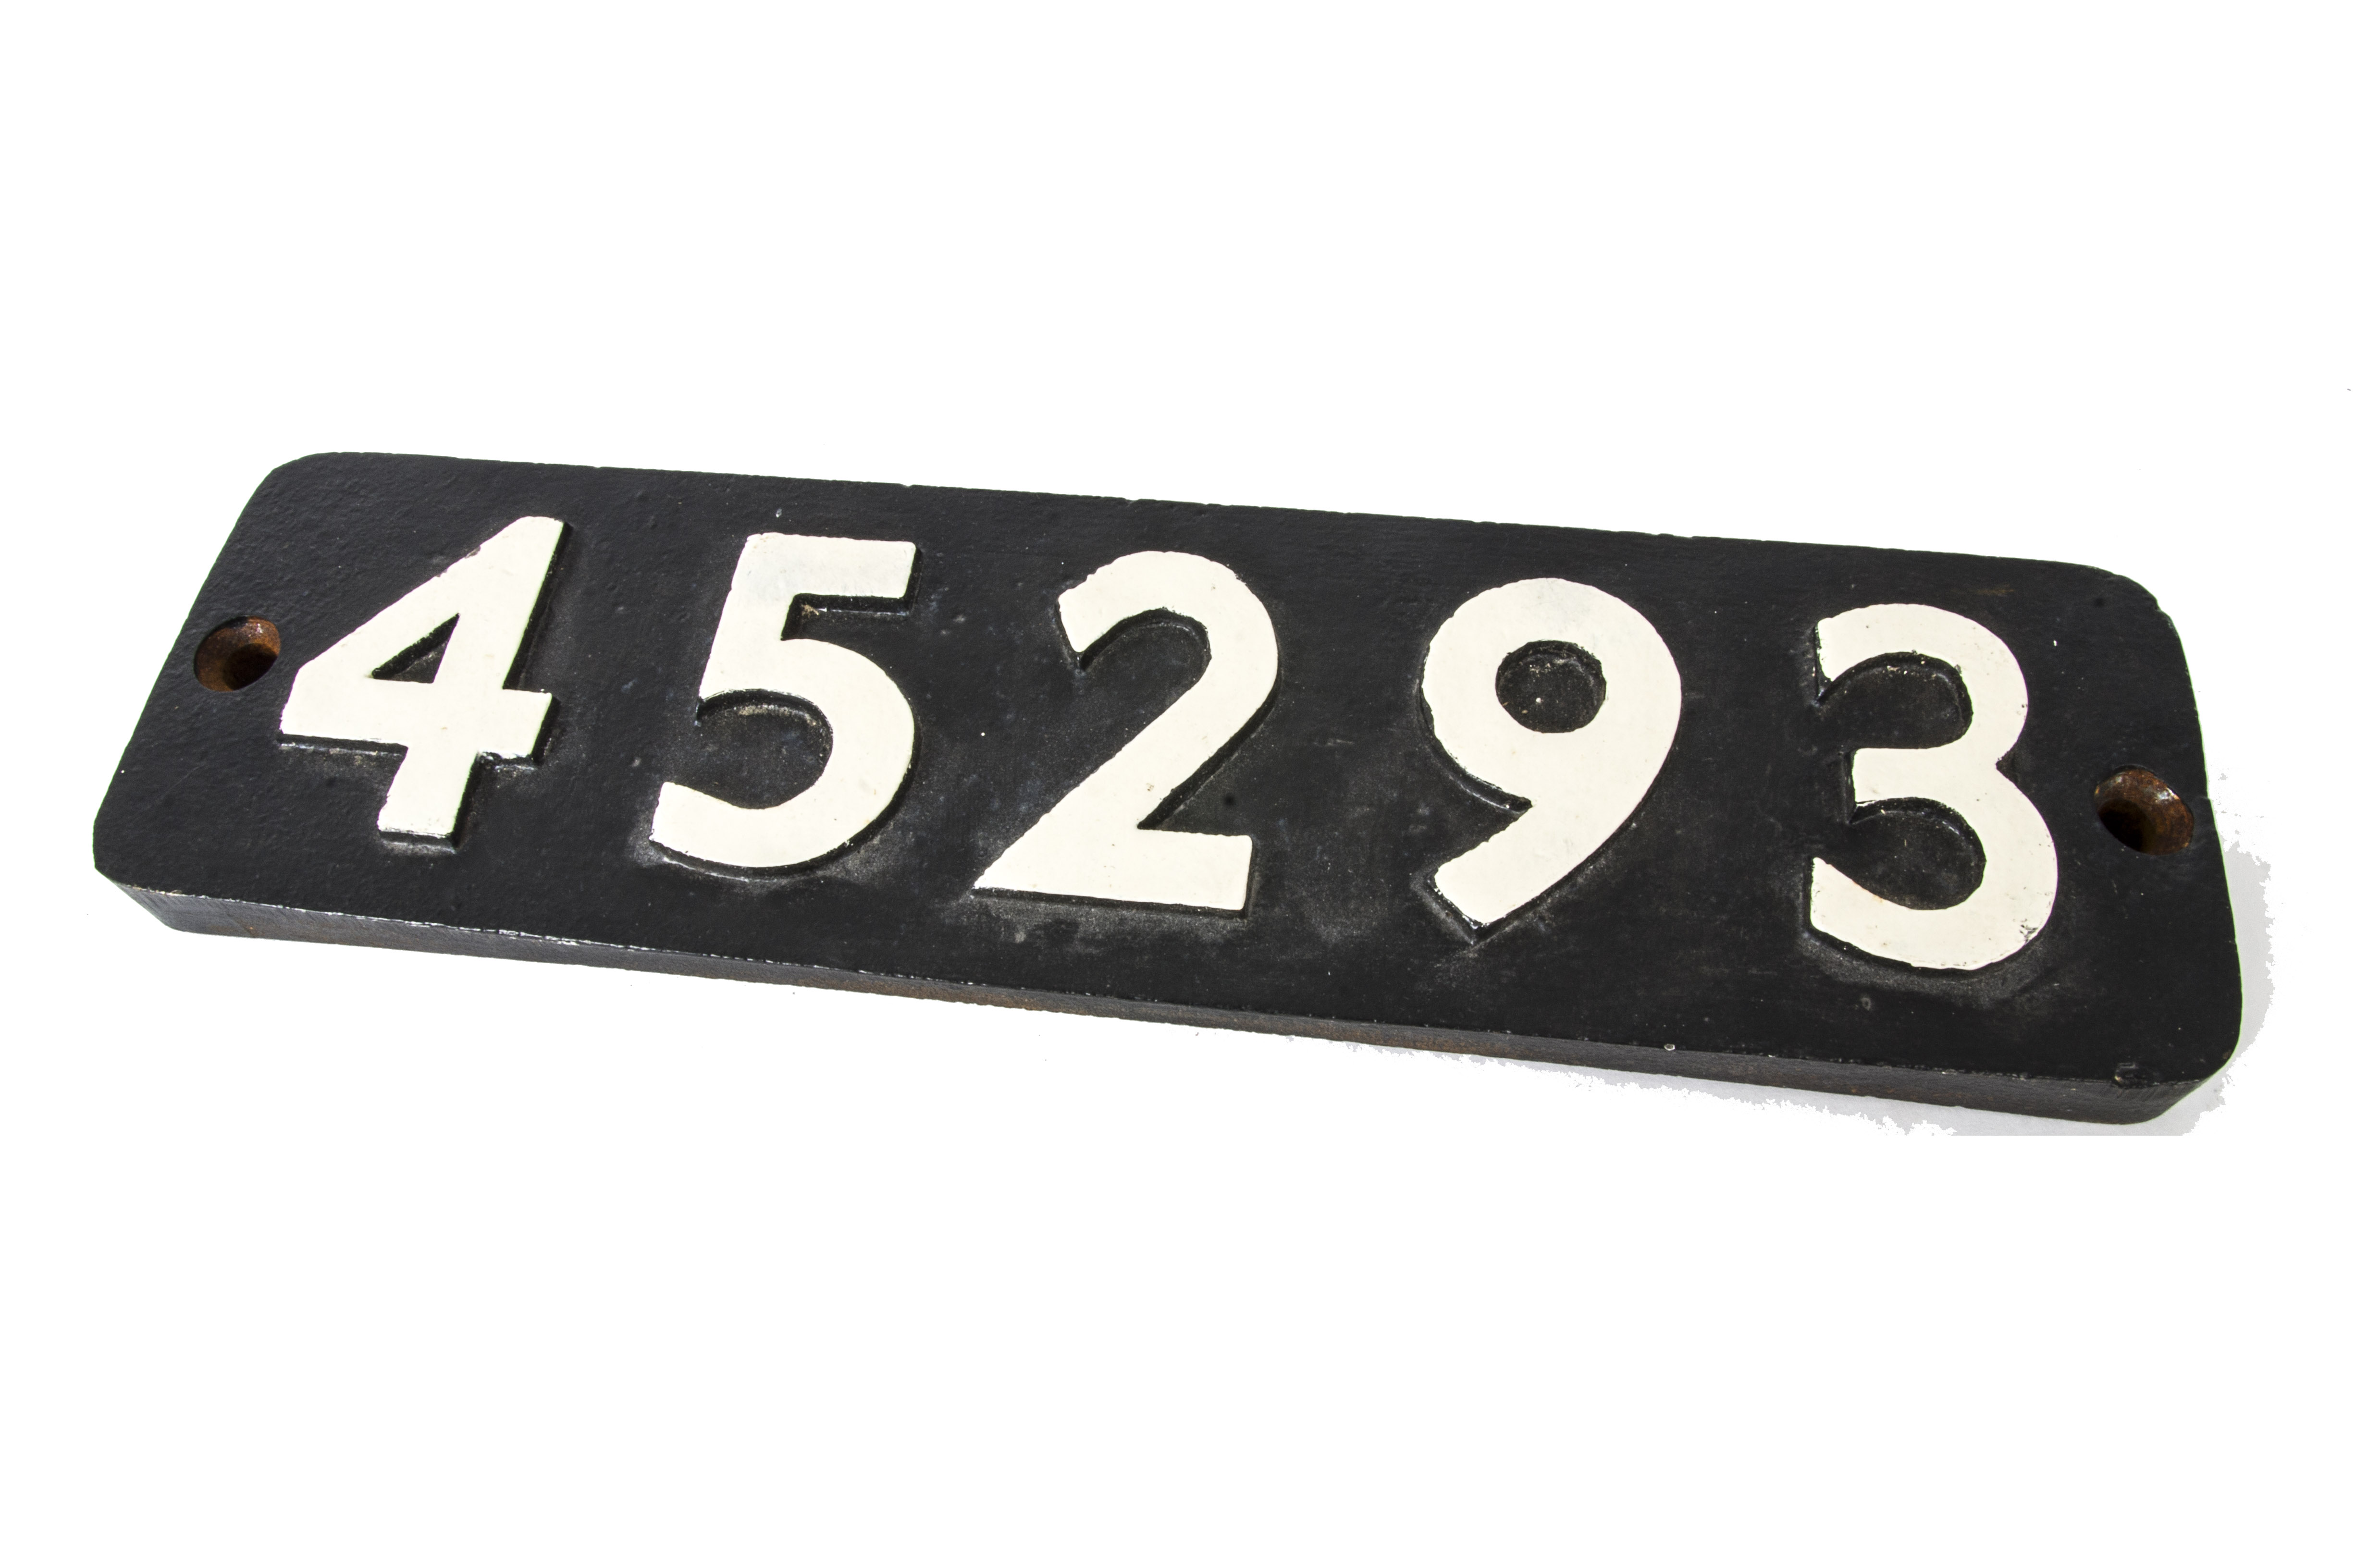 A BR 'Black Five' Smoke Box Number Plate 45293, a cast iron plate with white lettering (repainted)